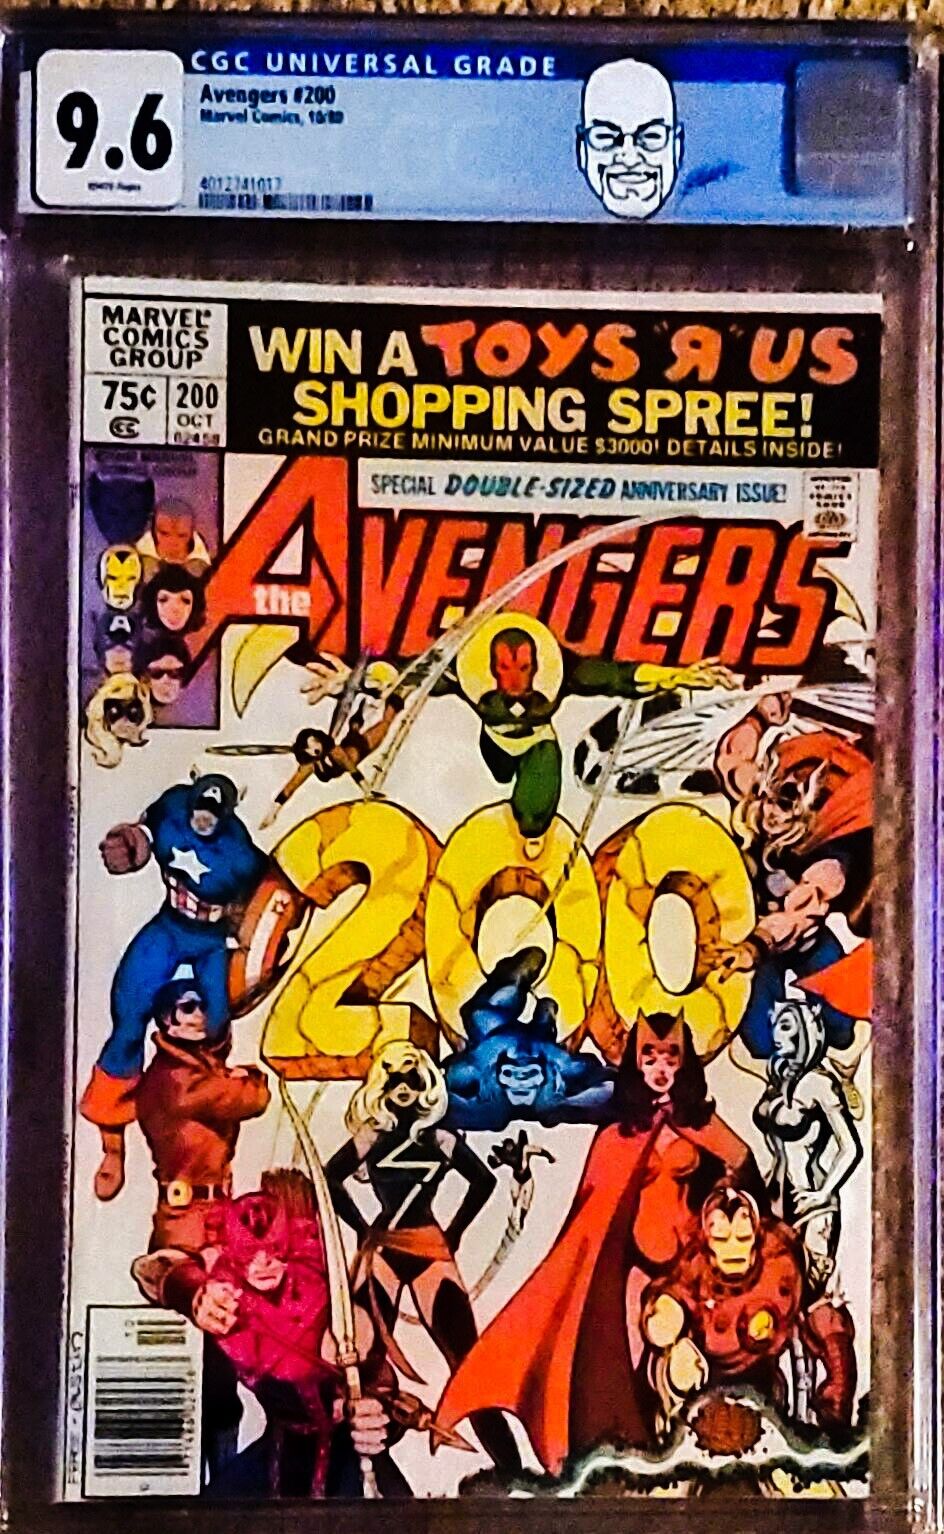 AVENGERS #200 10/80 CGC 9.6 Special Double-sized Anniversary Issue Pérez Label